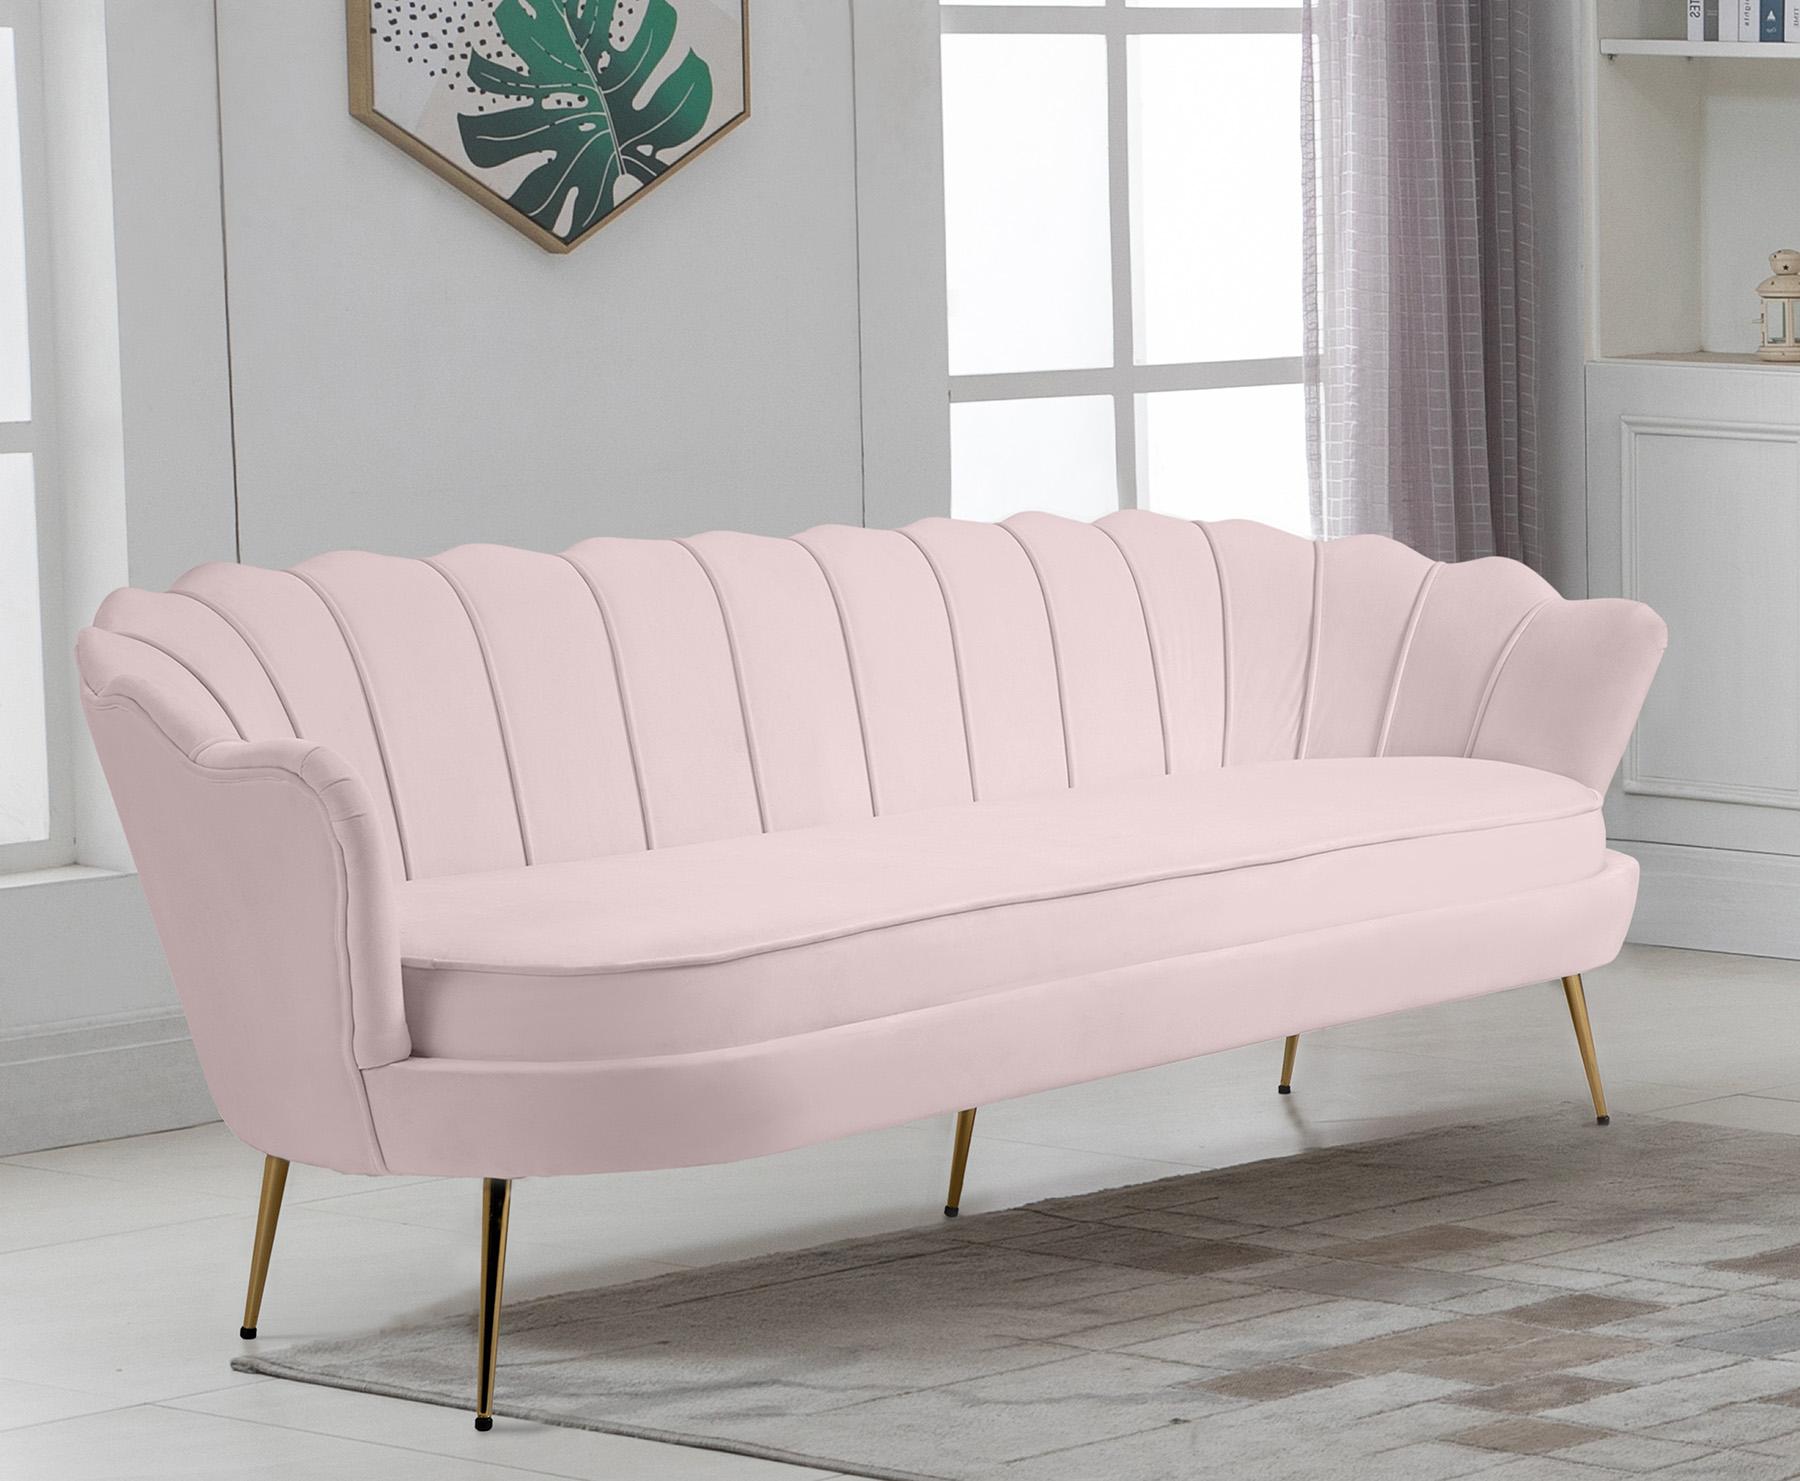 

    
Glam PINK Velvet Channel Tufted Sofa GARDENIA 684Pink-S Meridian Contemporary
